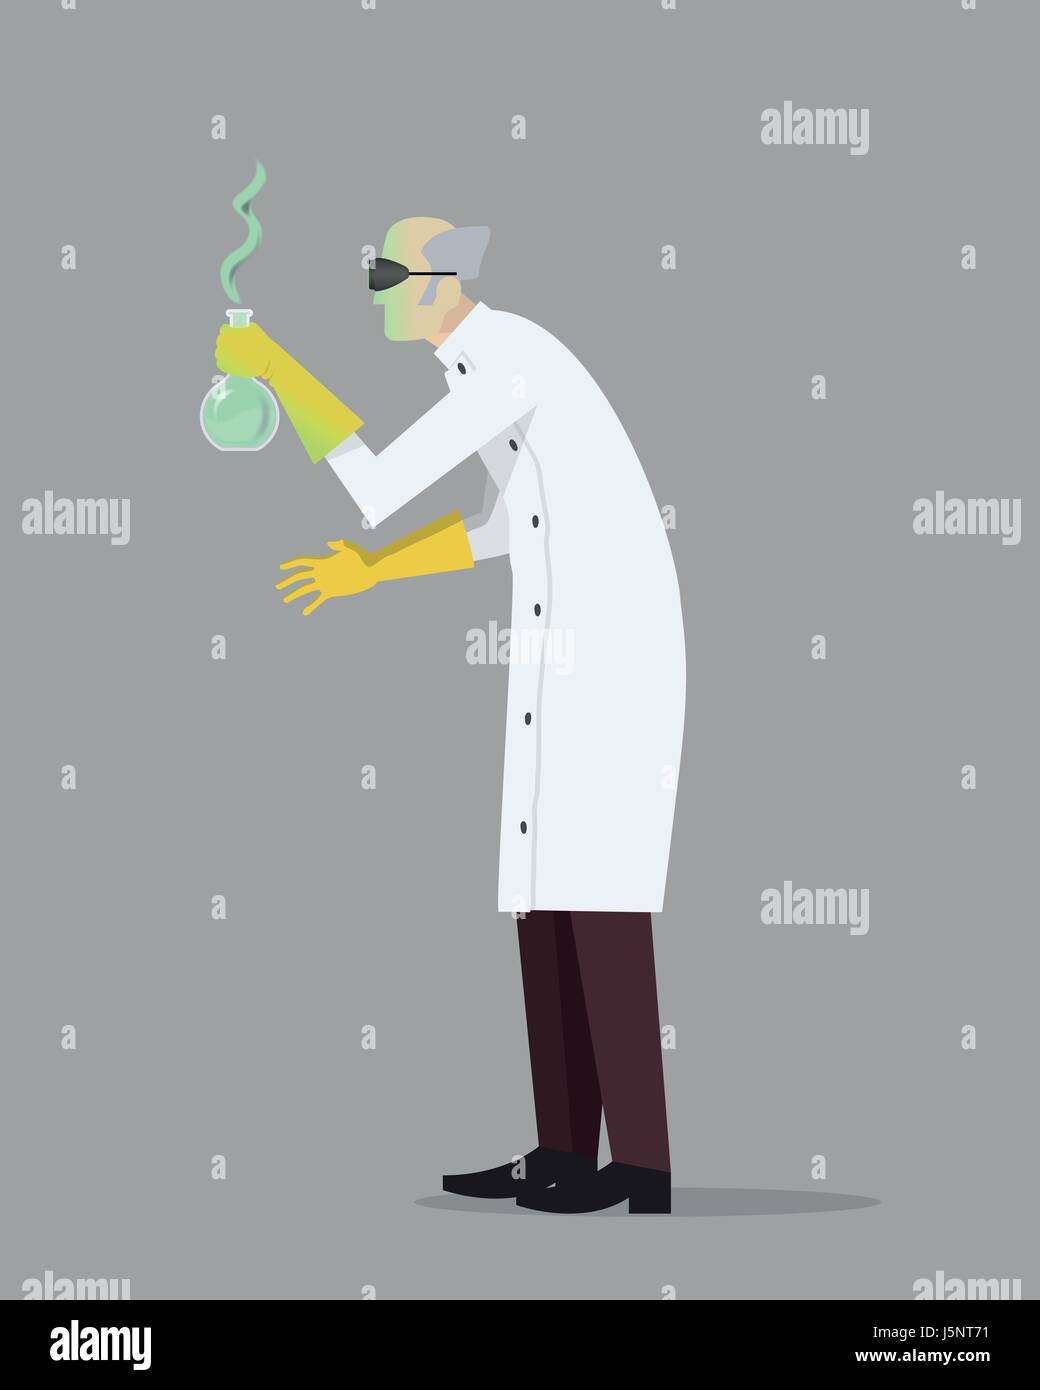 A crazy mad scientist in his laboratory experimenting on secret formula. Stock Vector